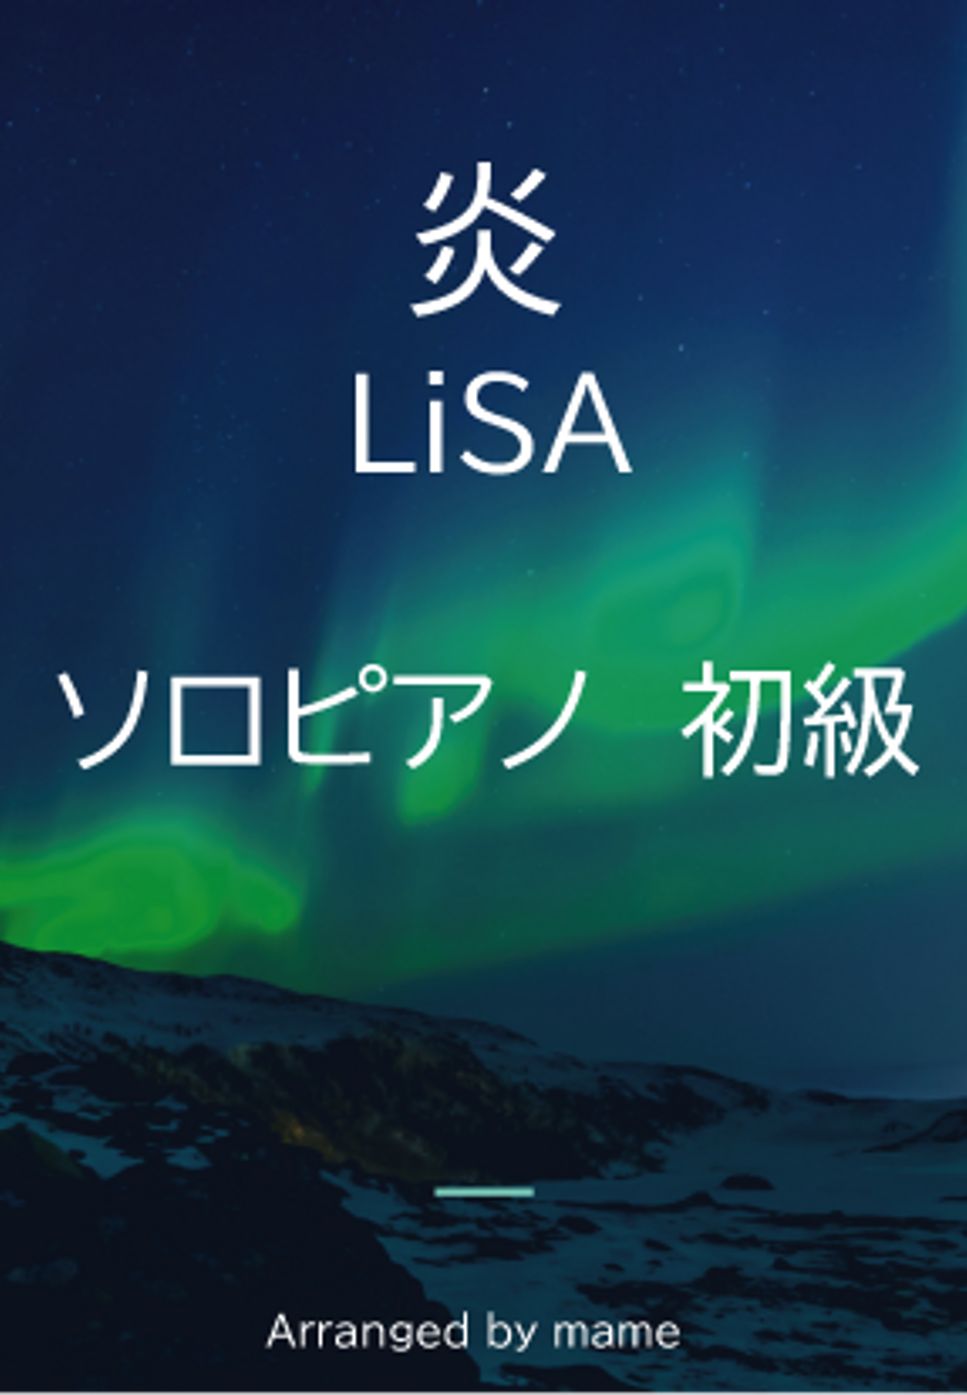 LiSA - 炎 by mame